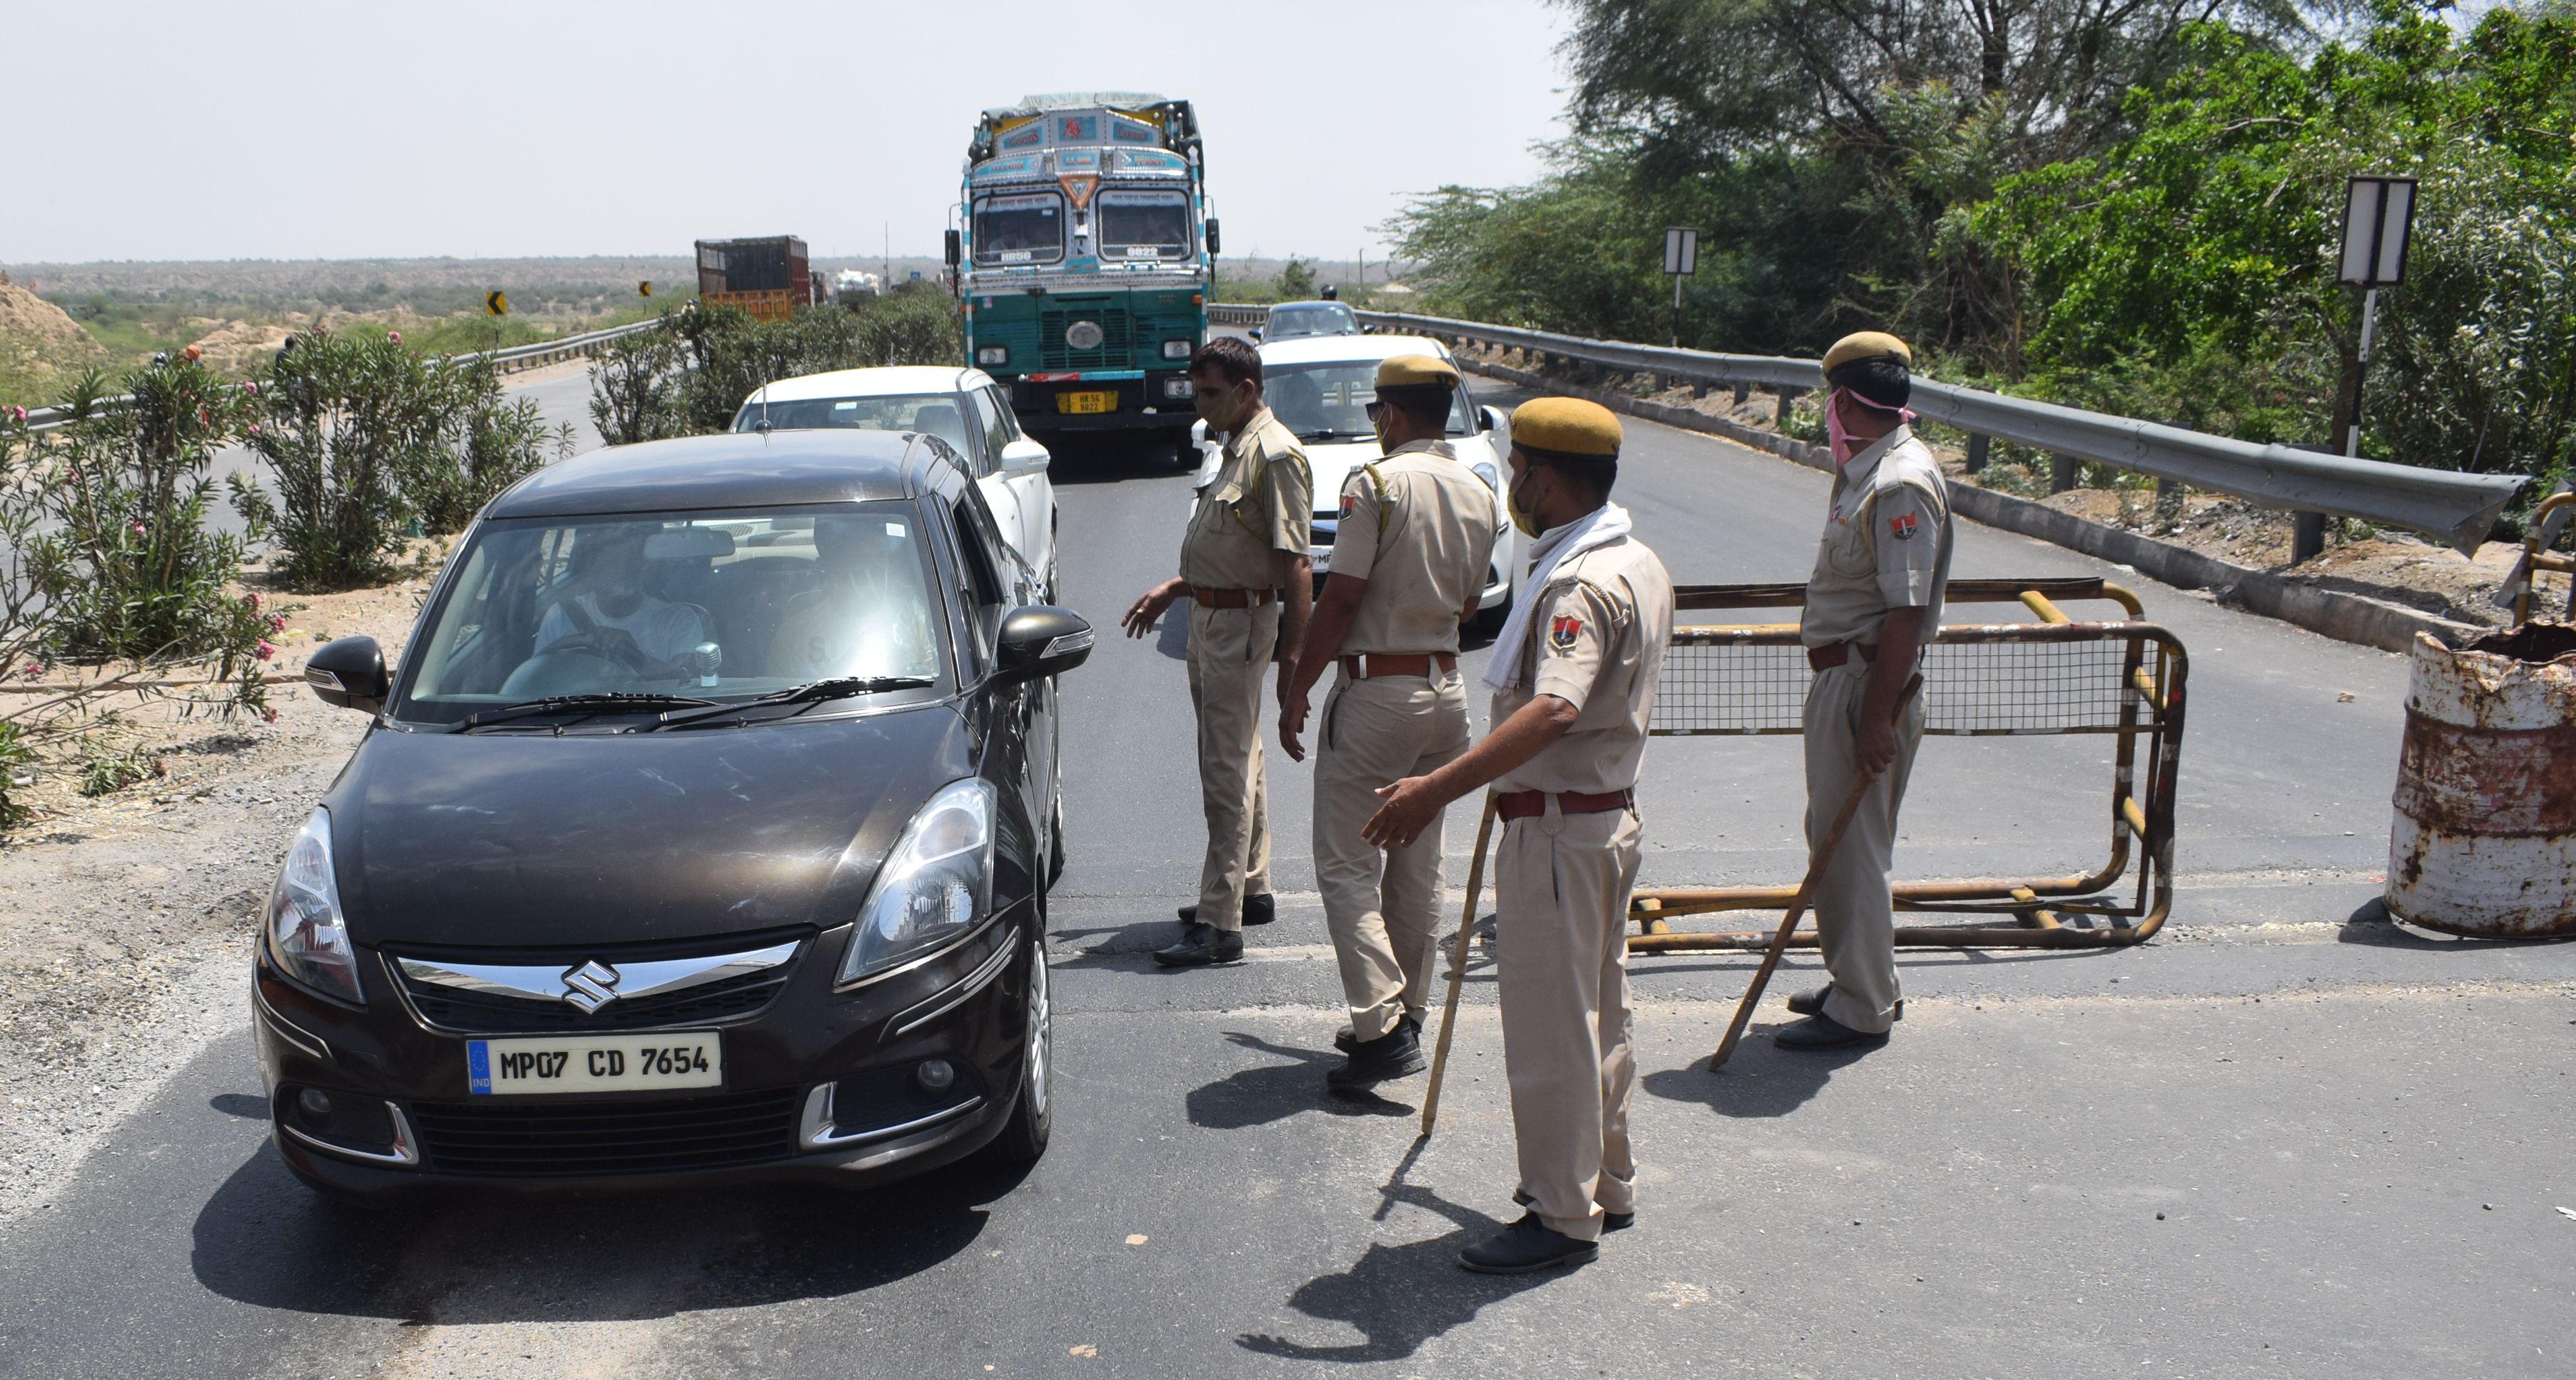  Traffic on boarder out of control, rules flying on entry into Rajasthan border